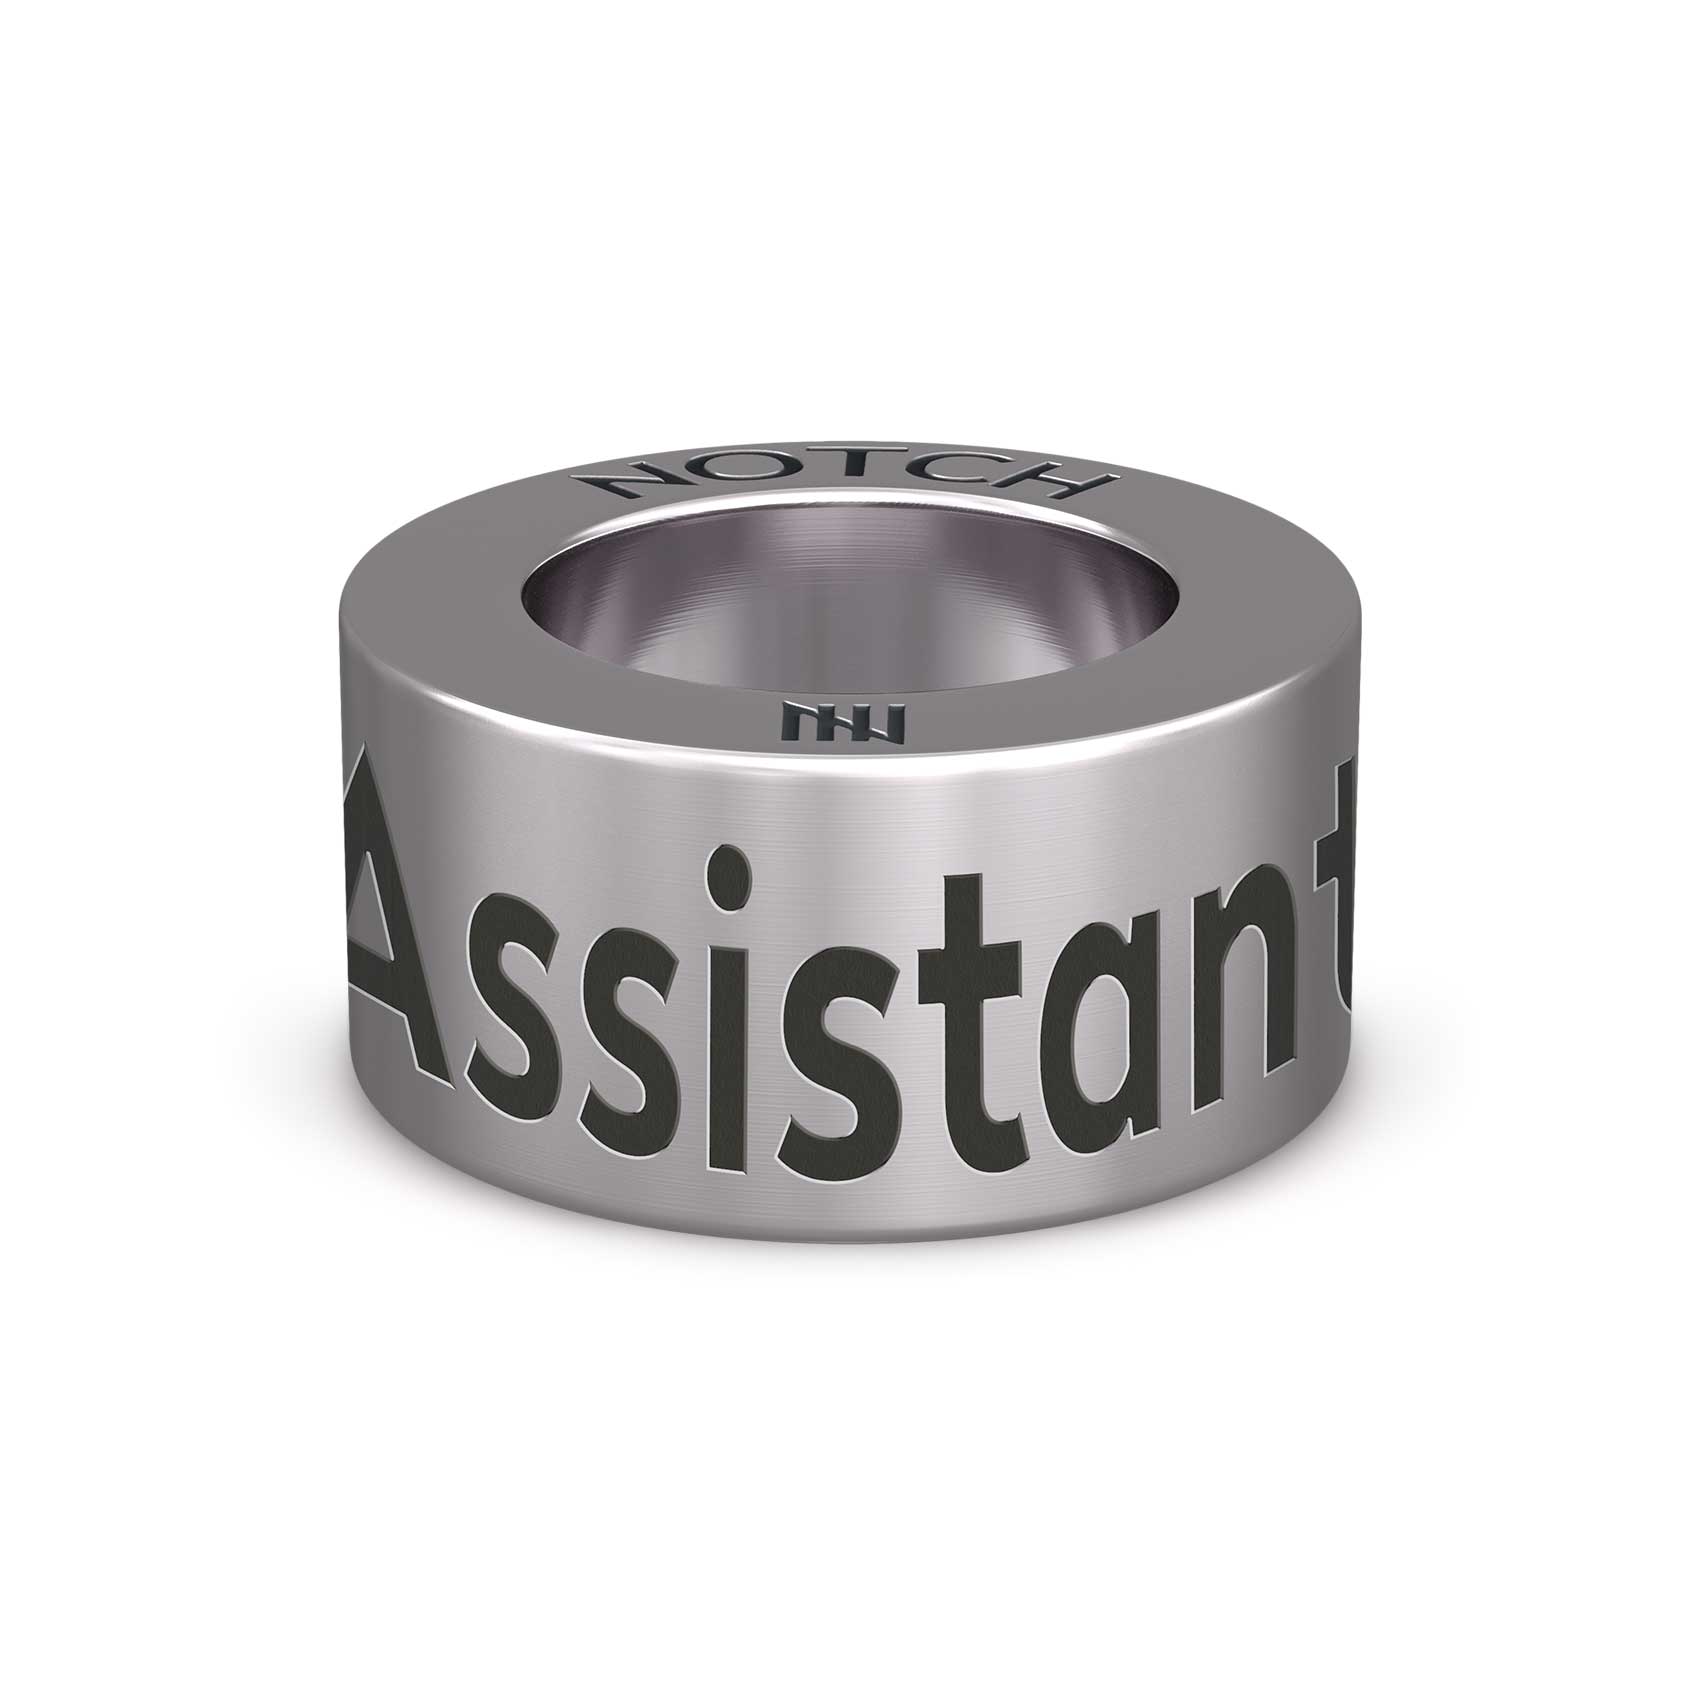 Assistant Officer NOTCH Charm